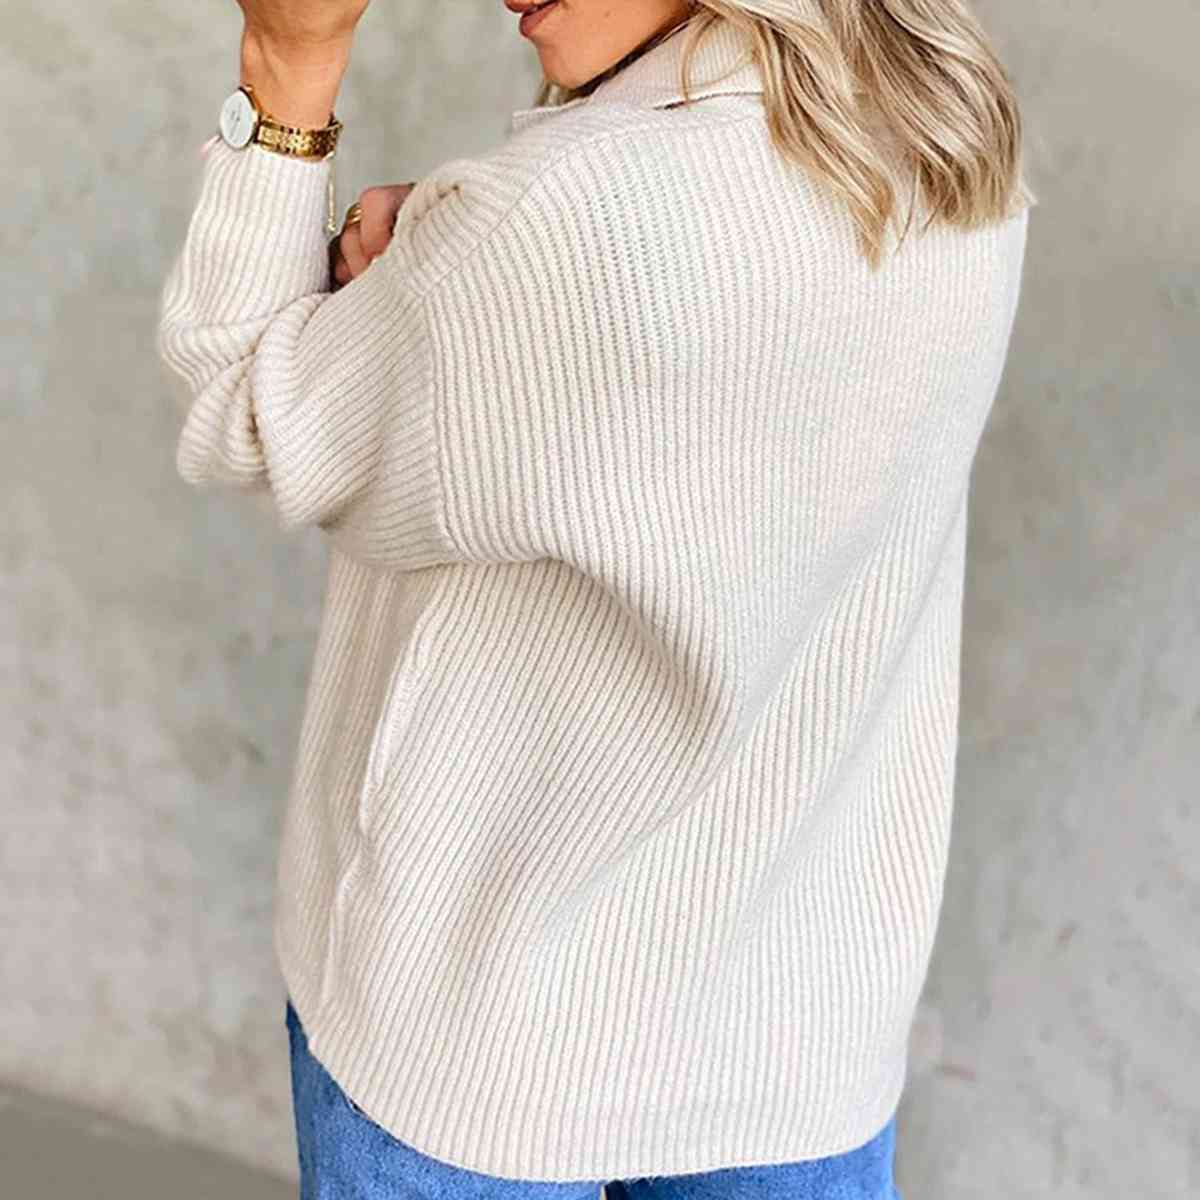 Collared Neck Rib-Knit Top BLUE ZONE PLANET